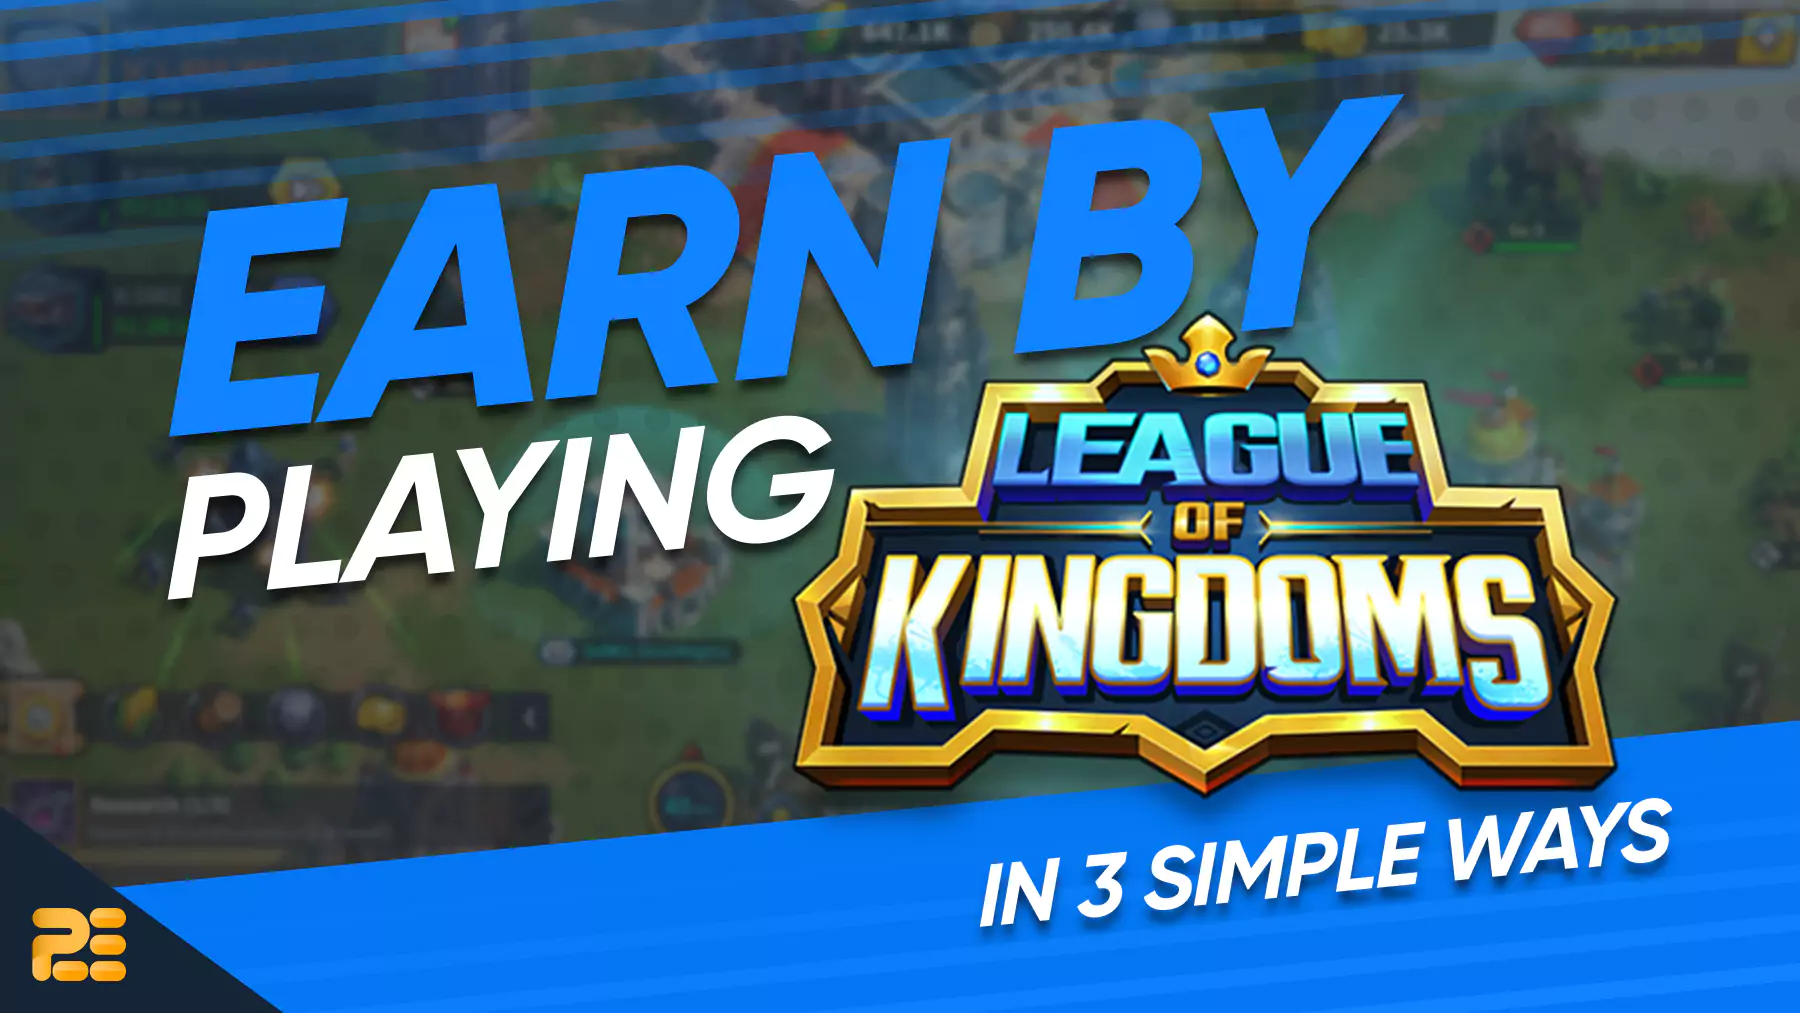 Earn by Playing League of Kingdoms in 3 Simple Ways